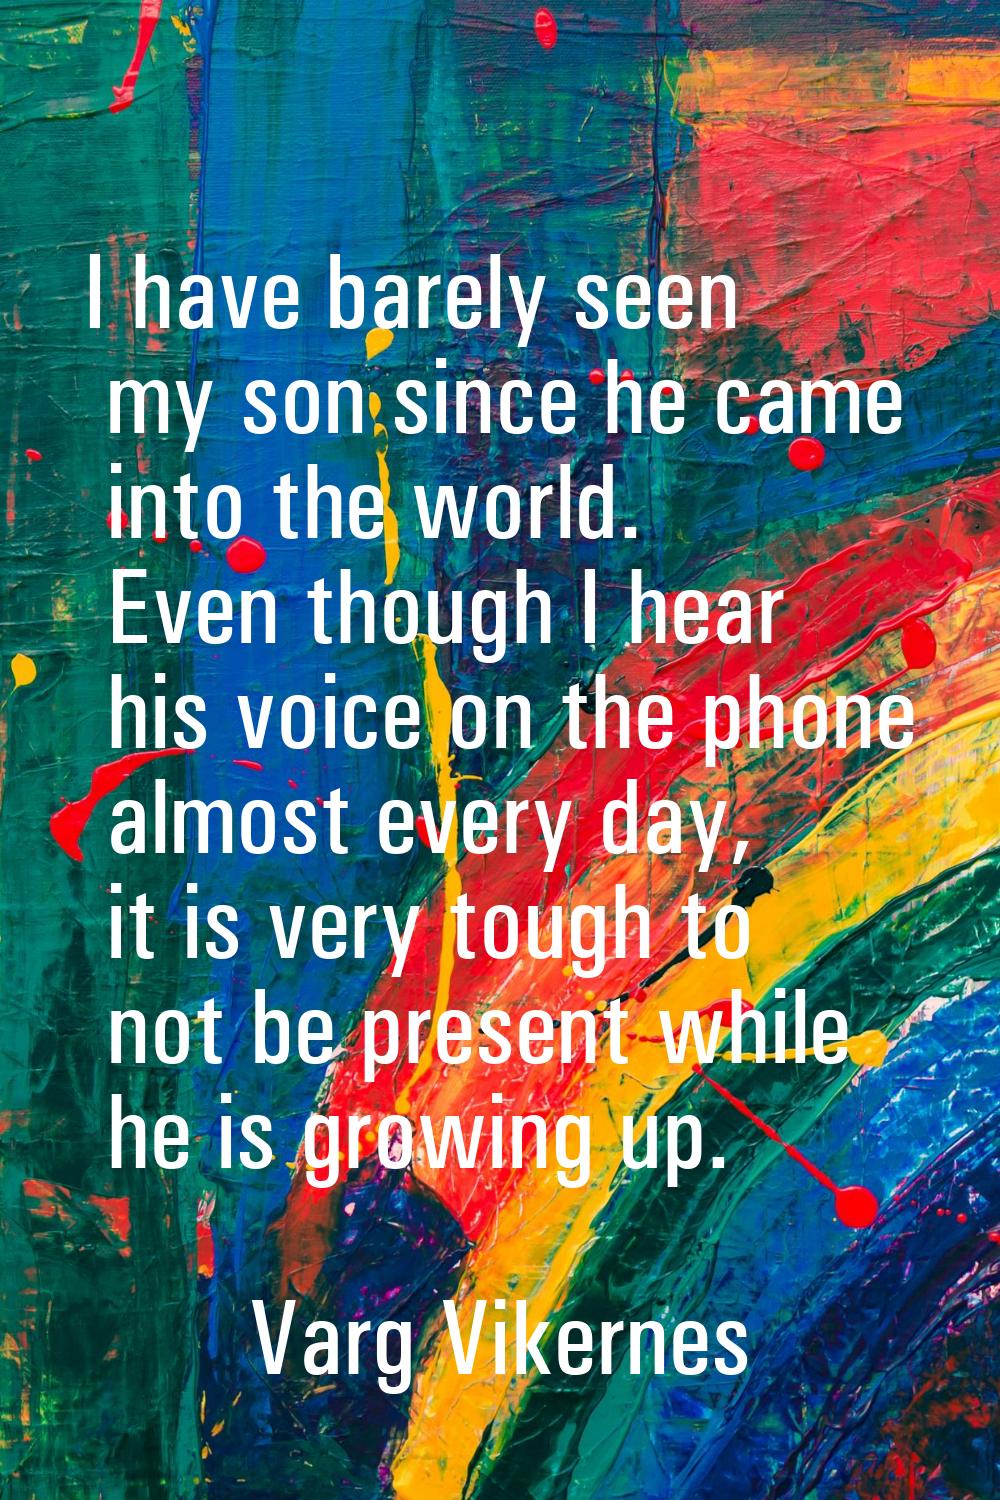 I have barely seen my son since he came into the world. Even though I hear his voice on the phone a